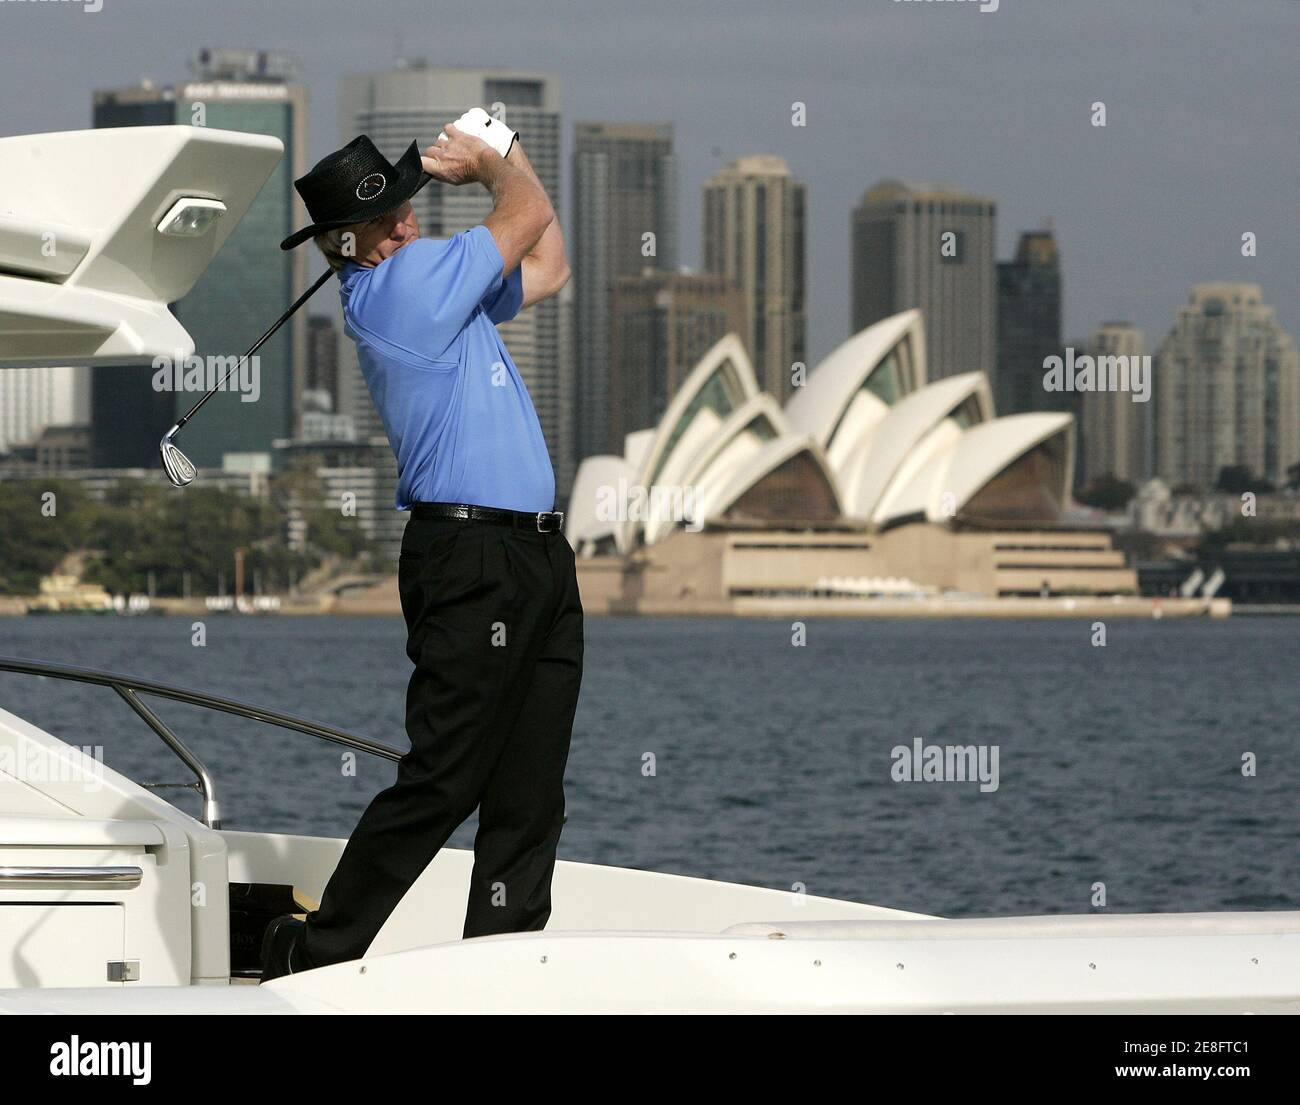 Australian golfer Greg Norman follows through during his swing from the back of a luxury yacht on Sydney Harbour May 11, 2006. Norman was promoting the Australian Open golf championship which is scheduled to be held in Sydney November 13-19. REUTERS/Will Burgess Stock Photo